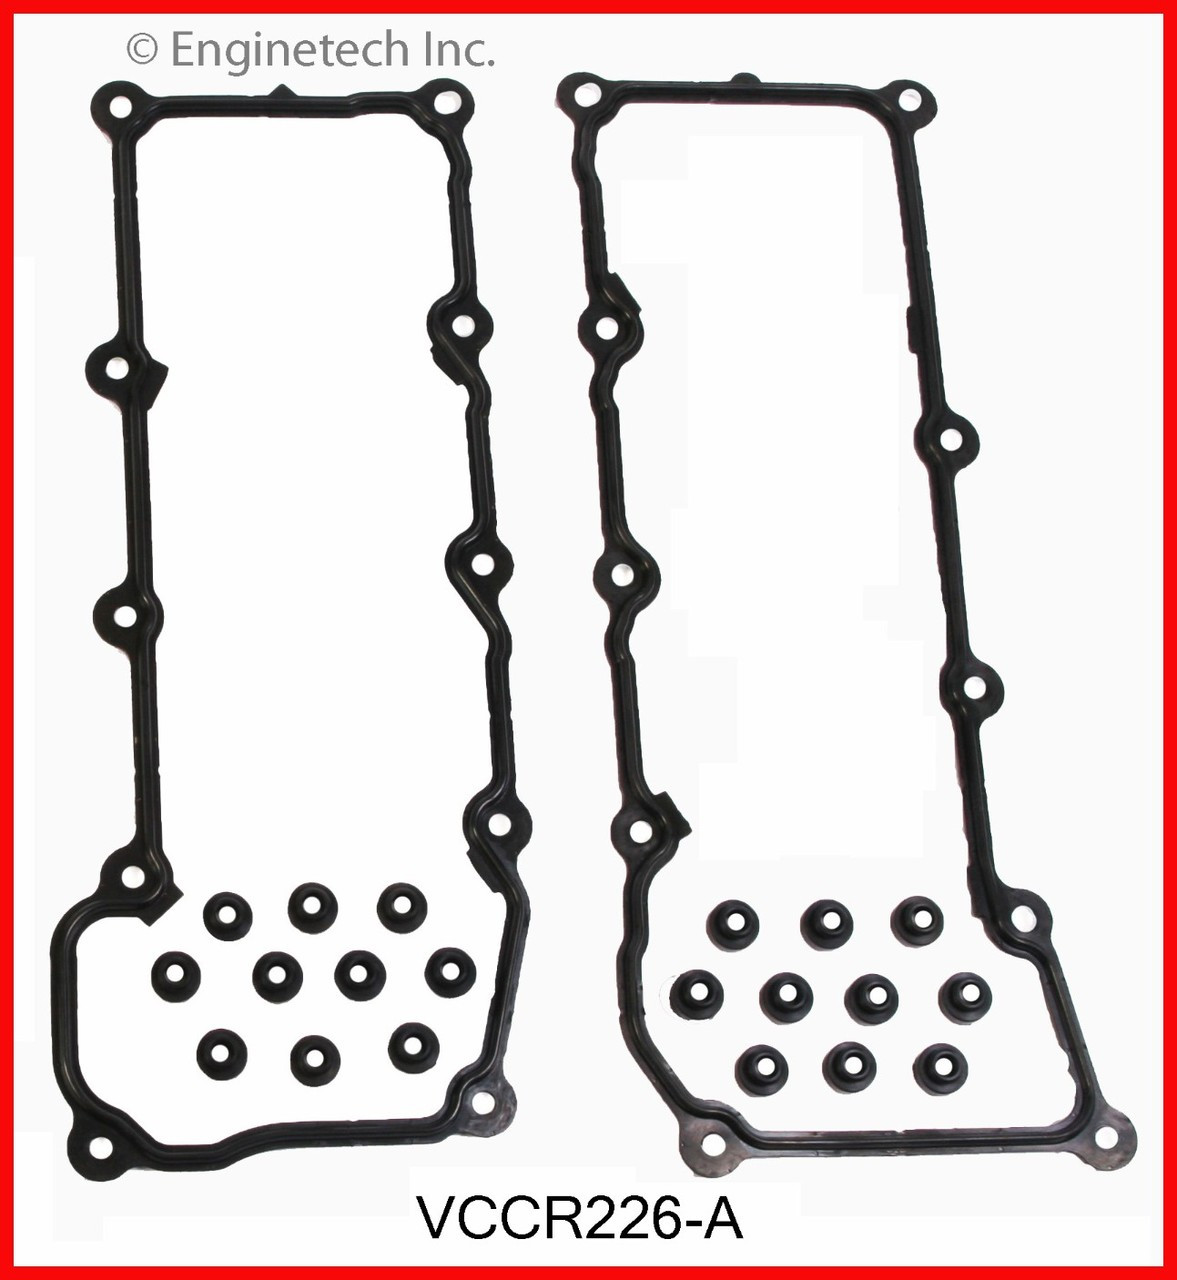 2005 Jeep Liberty 3.7L Engine Valve Cover Gasket VCCR226-A -14